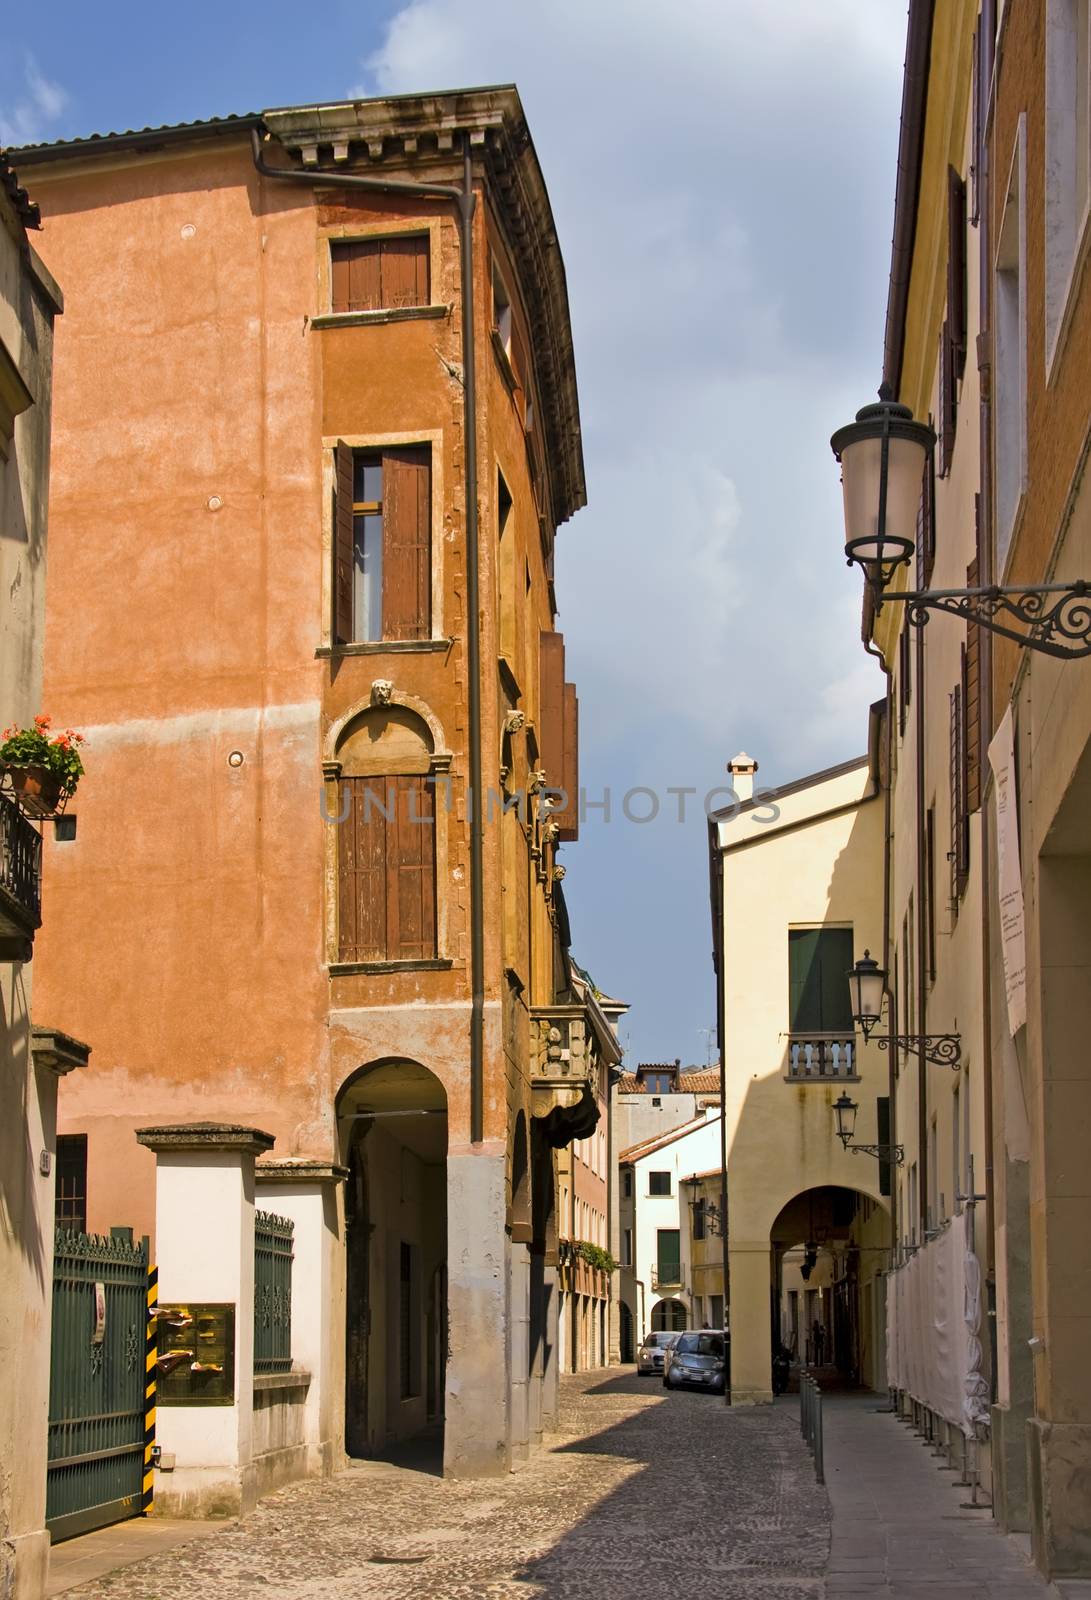 Typical street in Padua, Italy